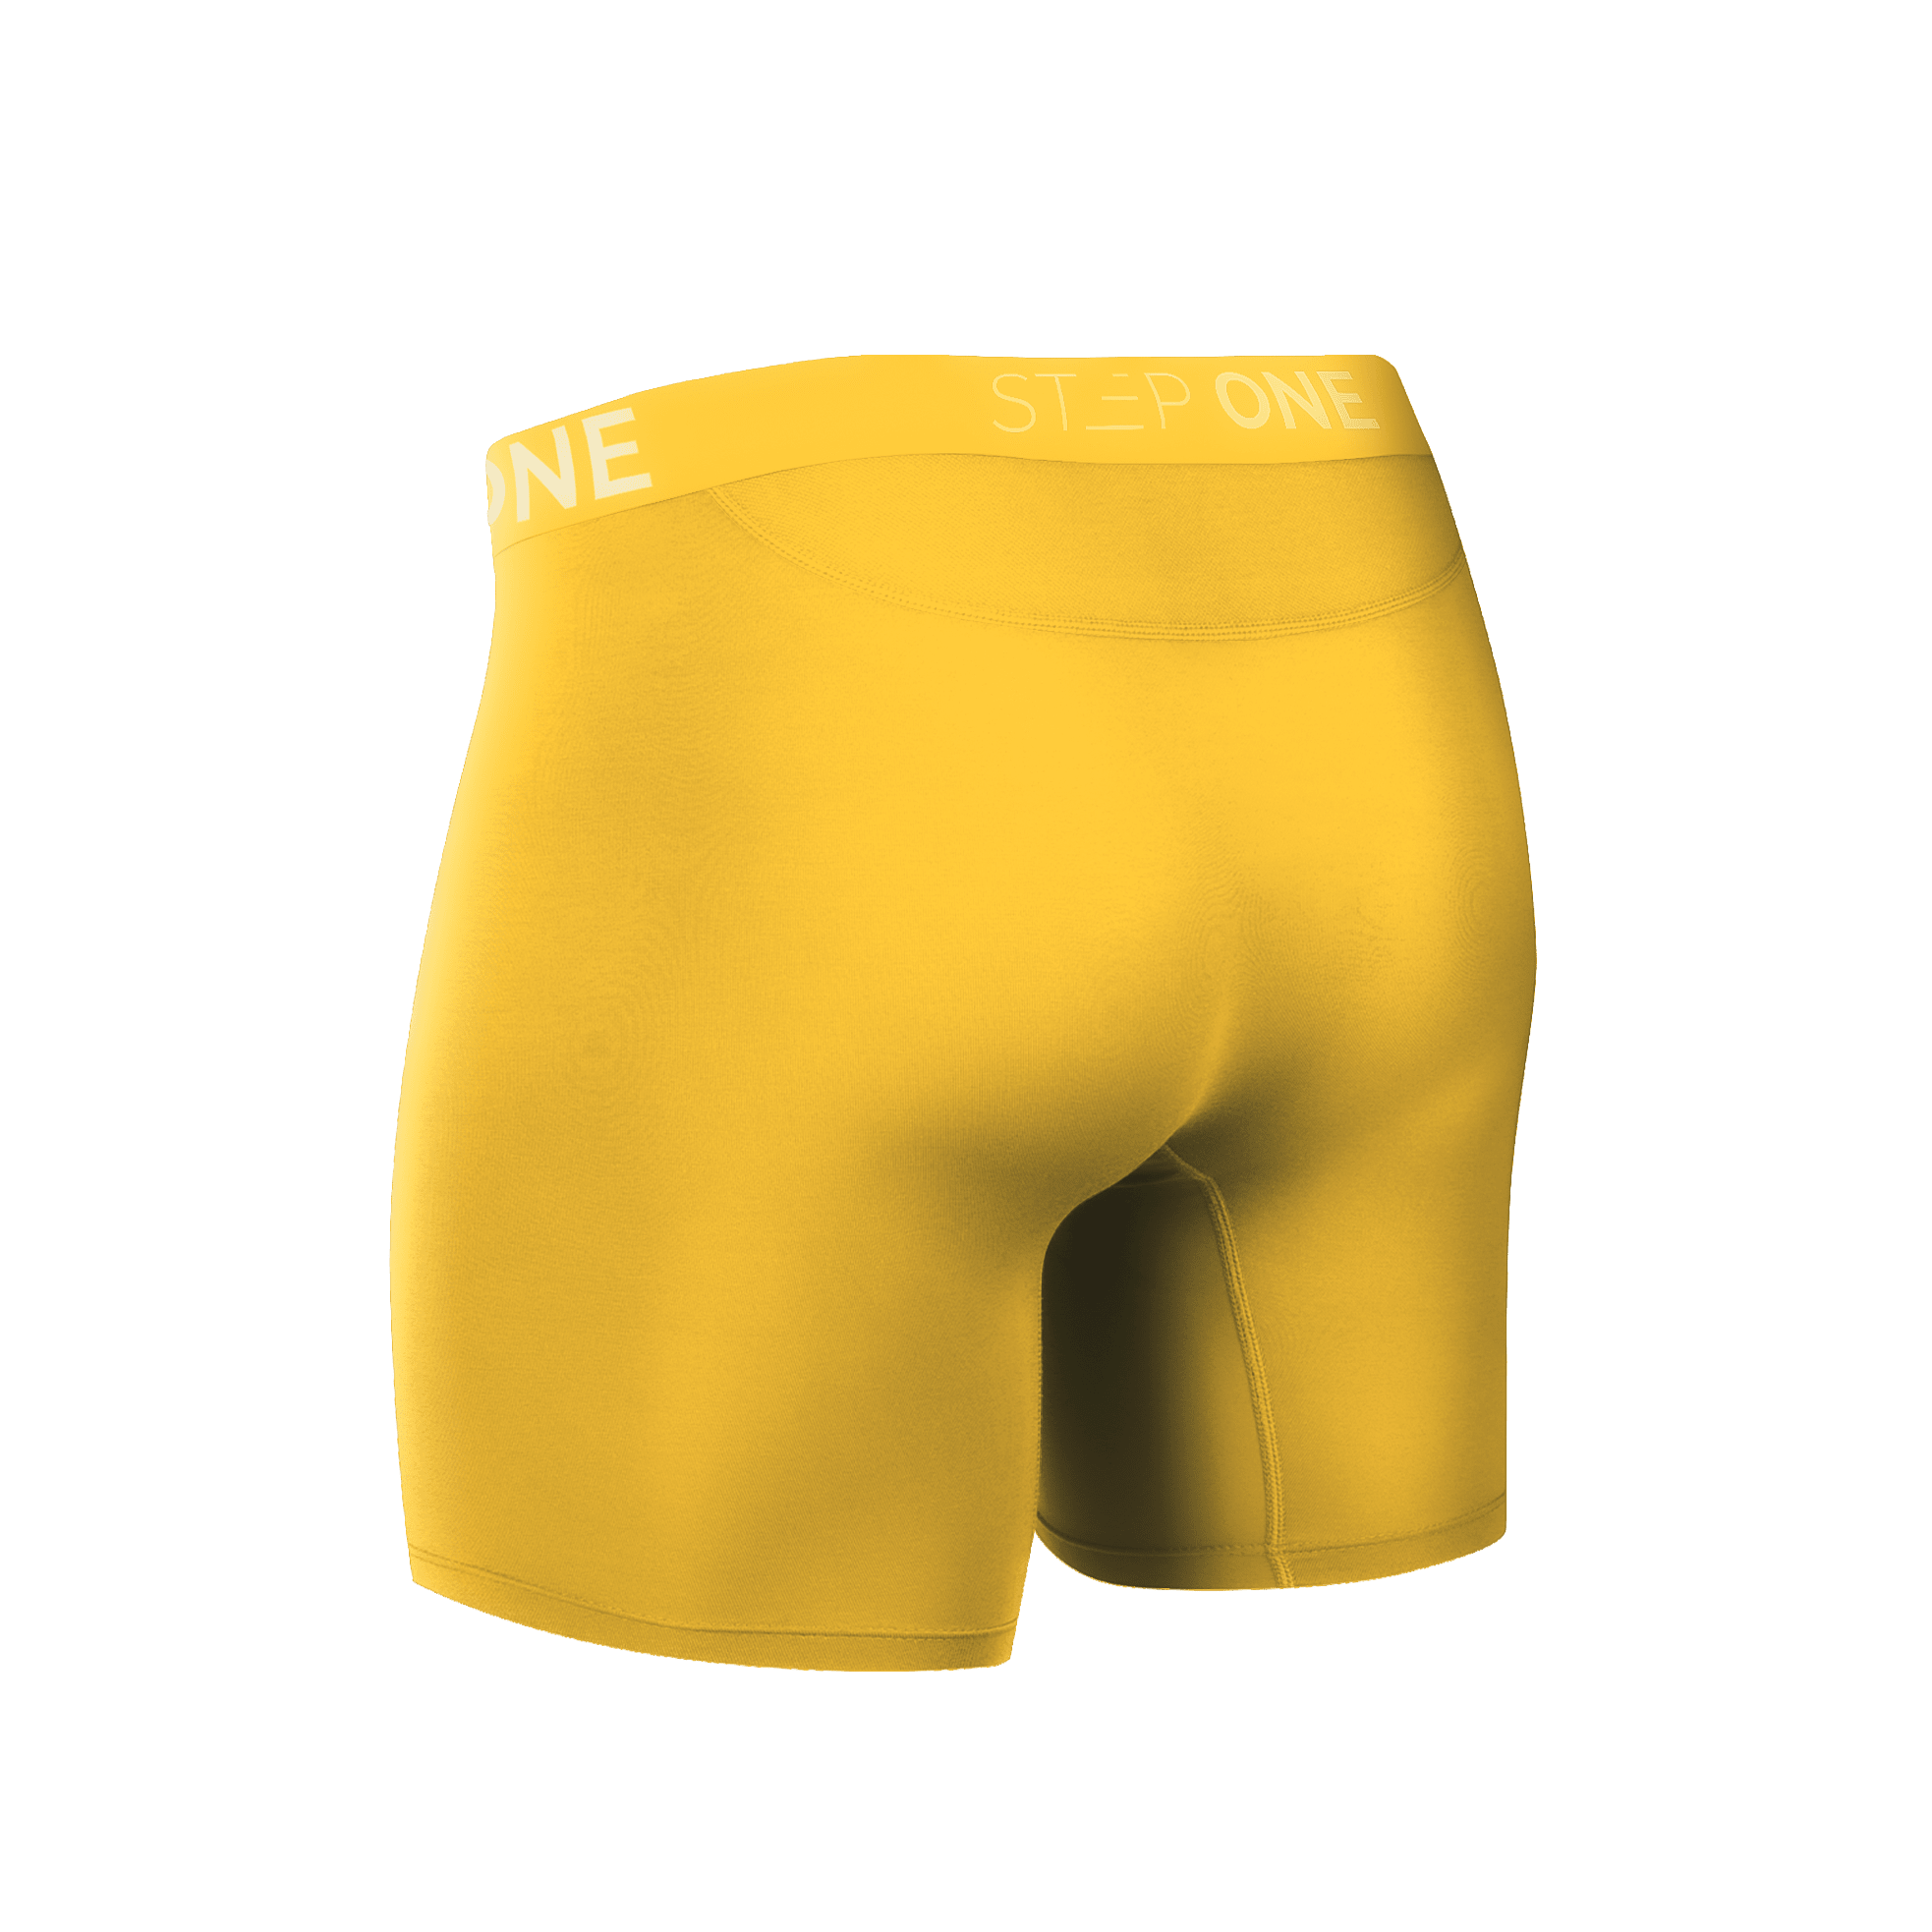 Boxer Brief Fly - Cheeky Cheddars